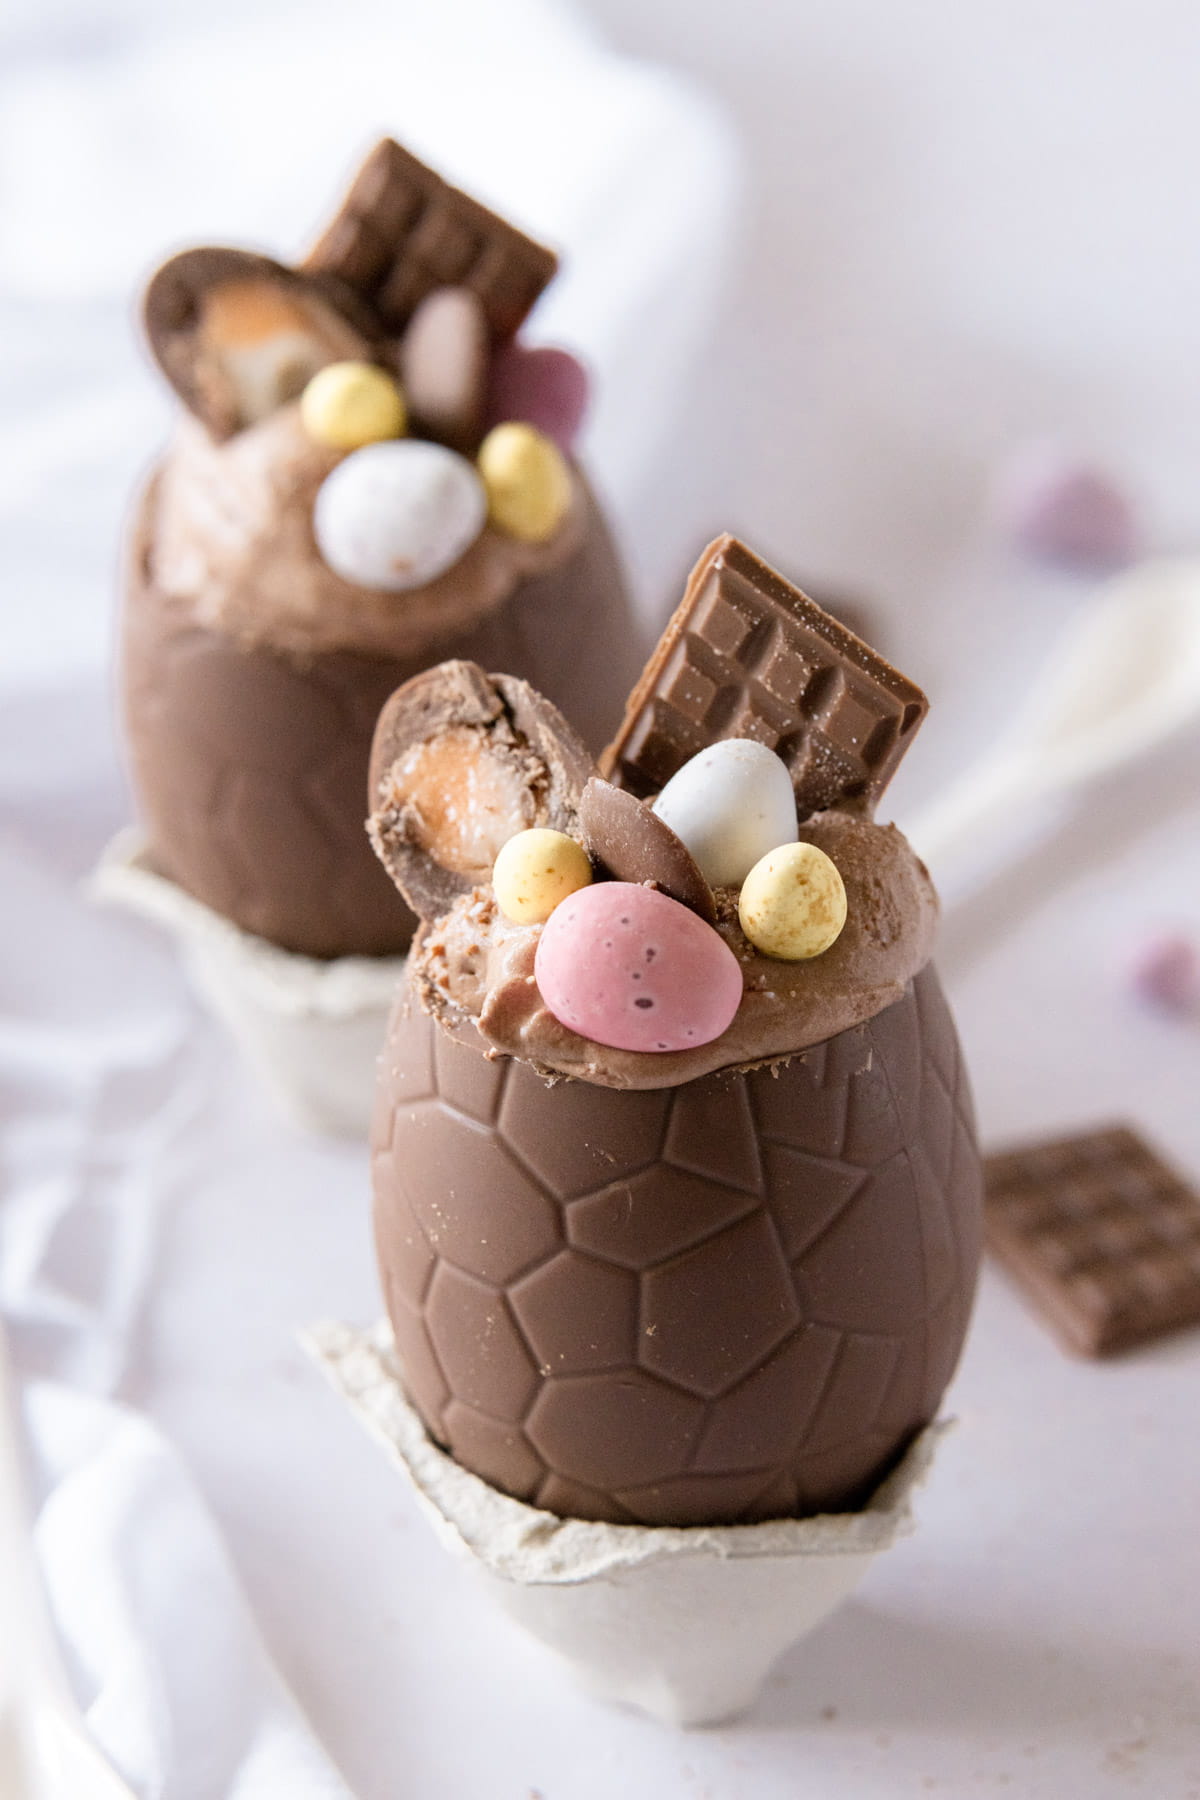 Two chocolate eggs filled with chocolate mousse and topped with Easter chocolate treats